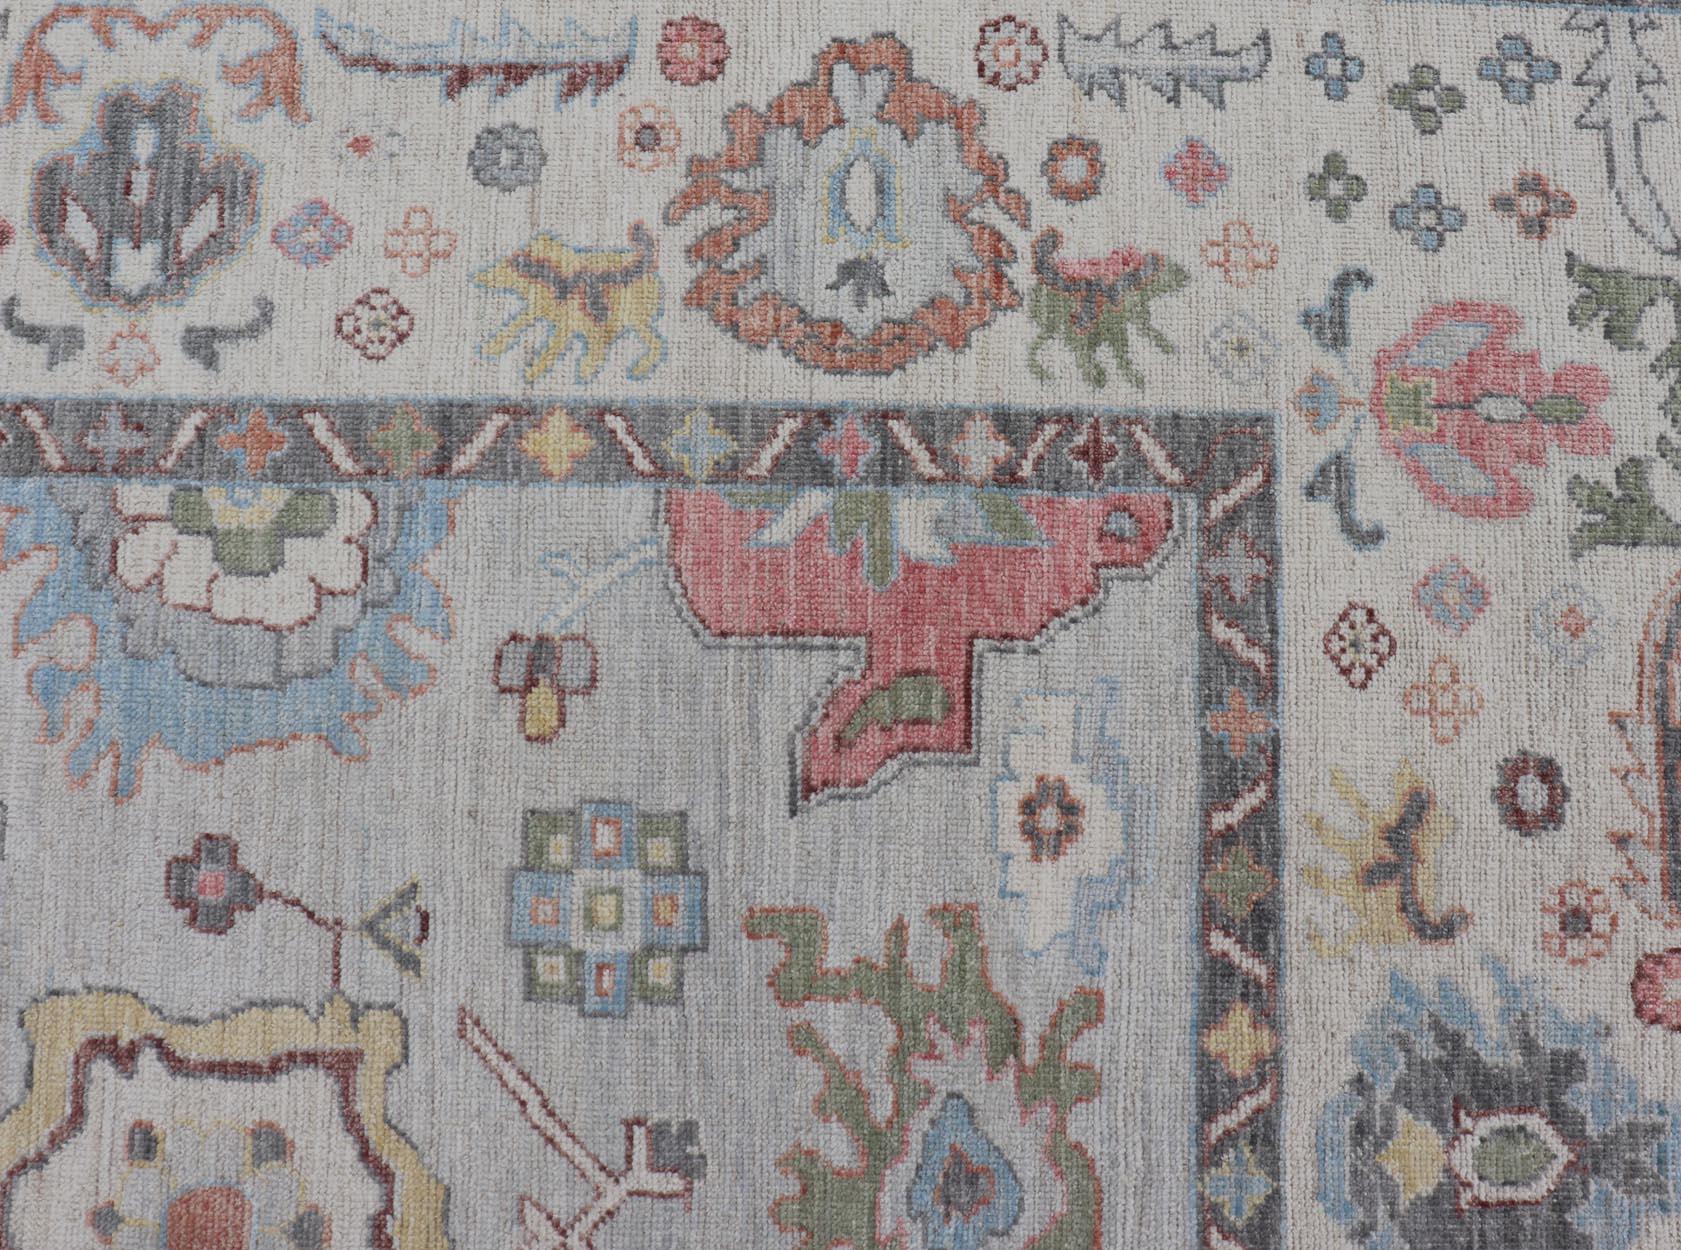 The border and field are covered in floral-like motifs filled with colors such as pink, green, gold, teal and red-oranges on top of silvery grey background. The border showcases a white-gray between two bands of a rich charcoal, edged with a small,